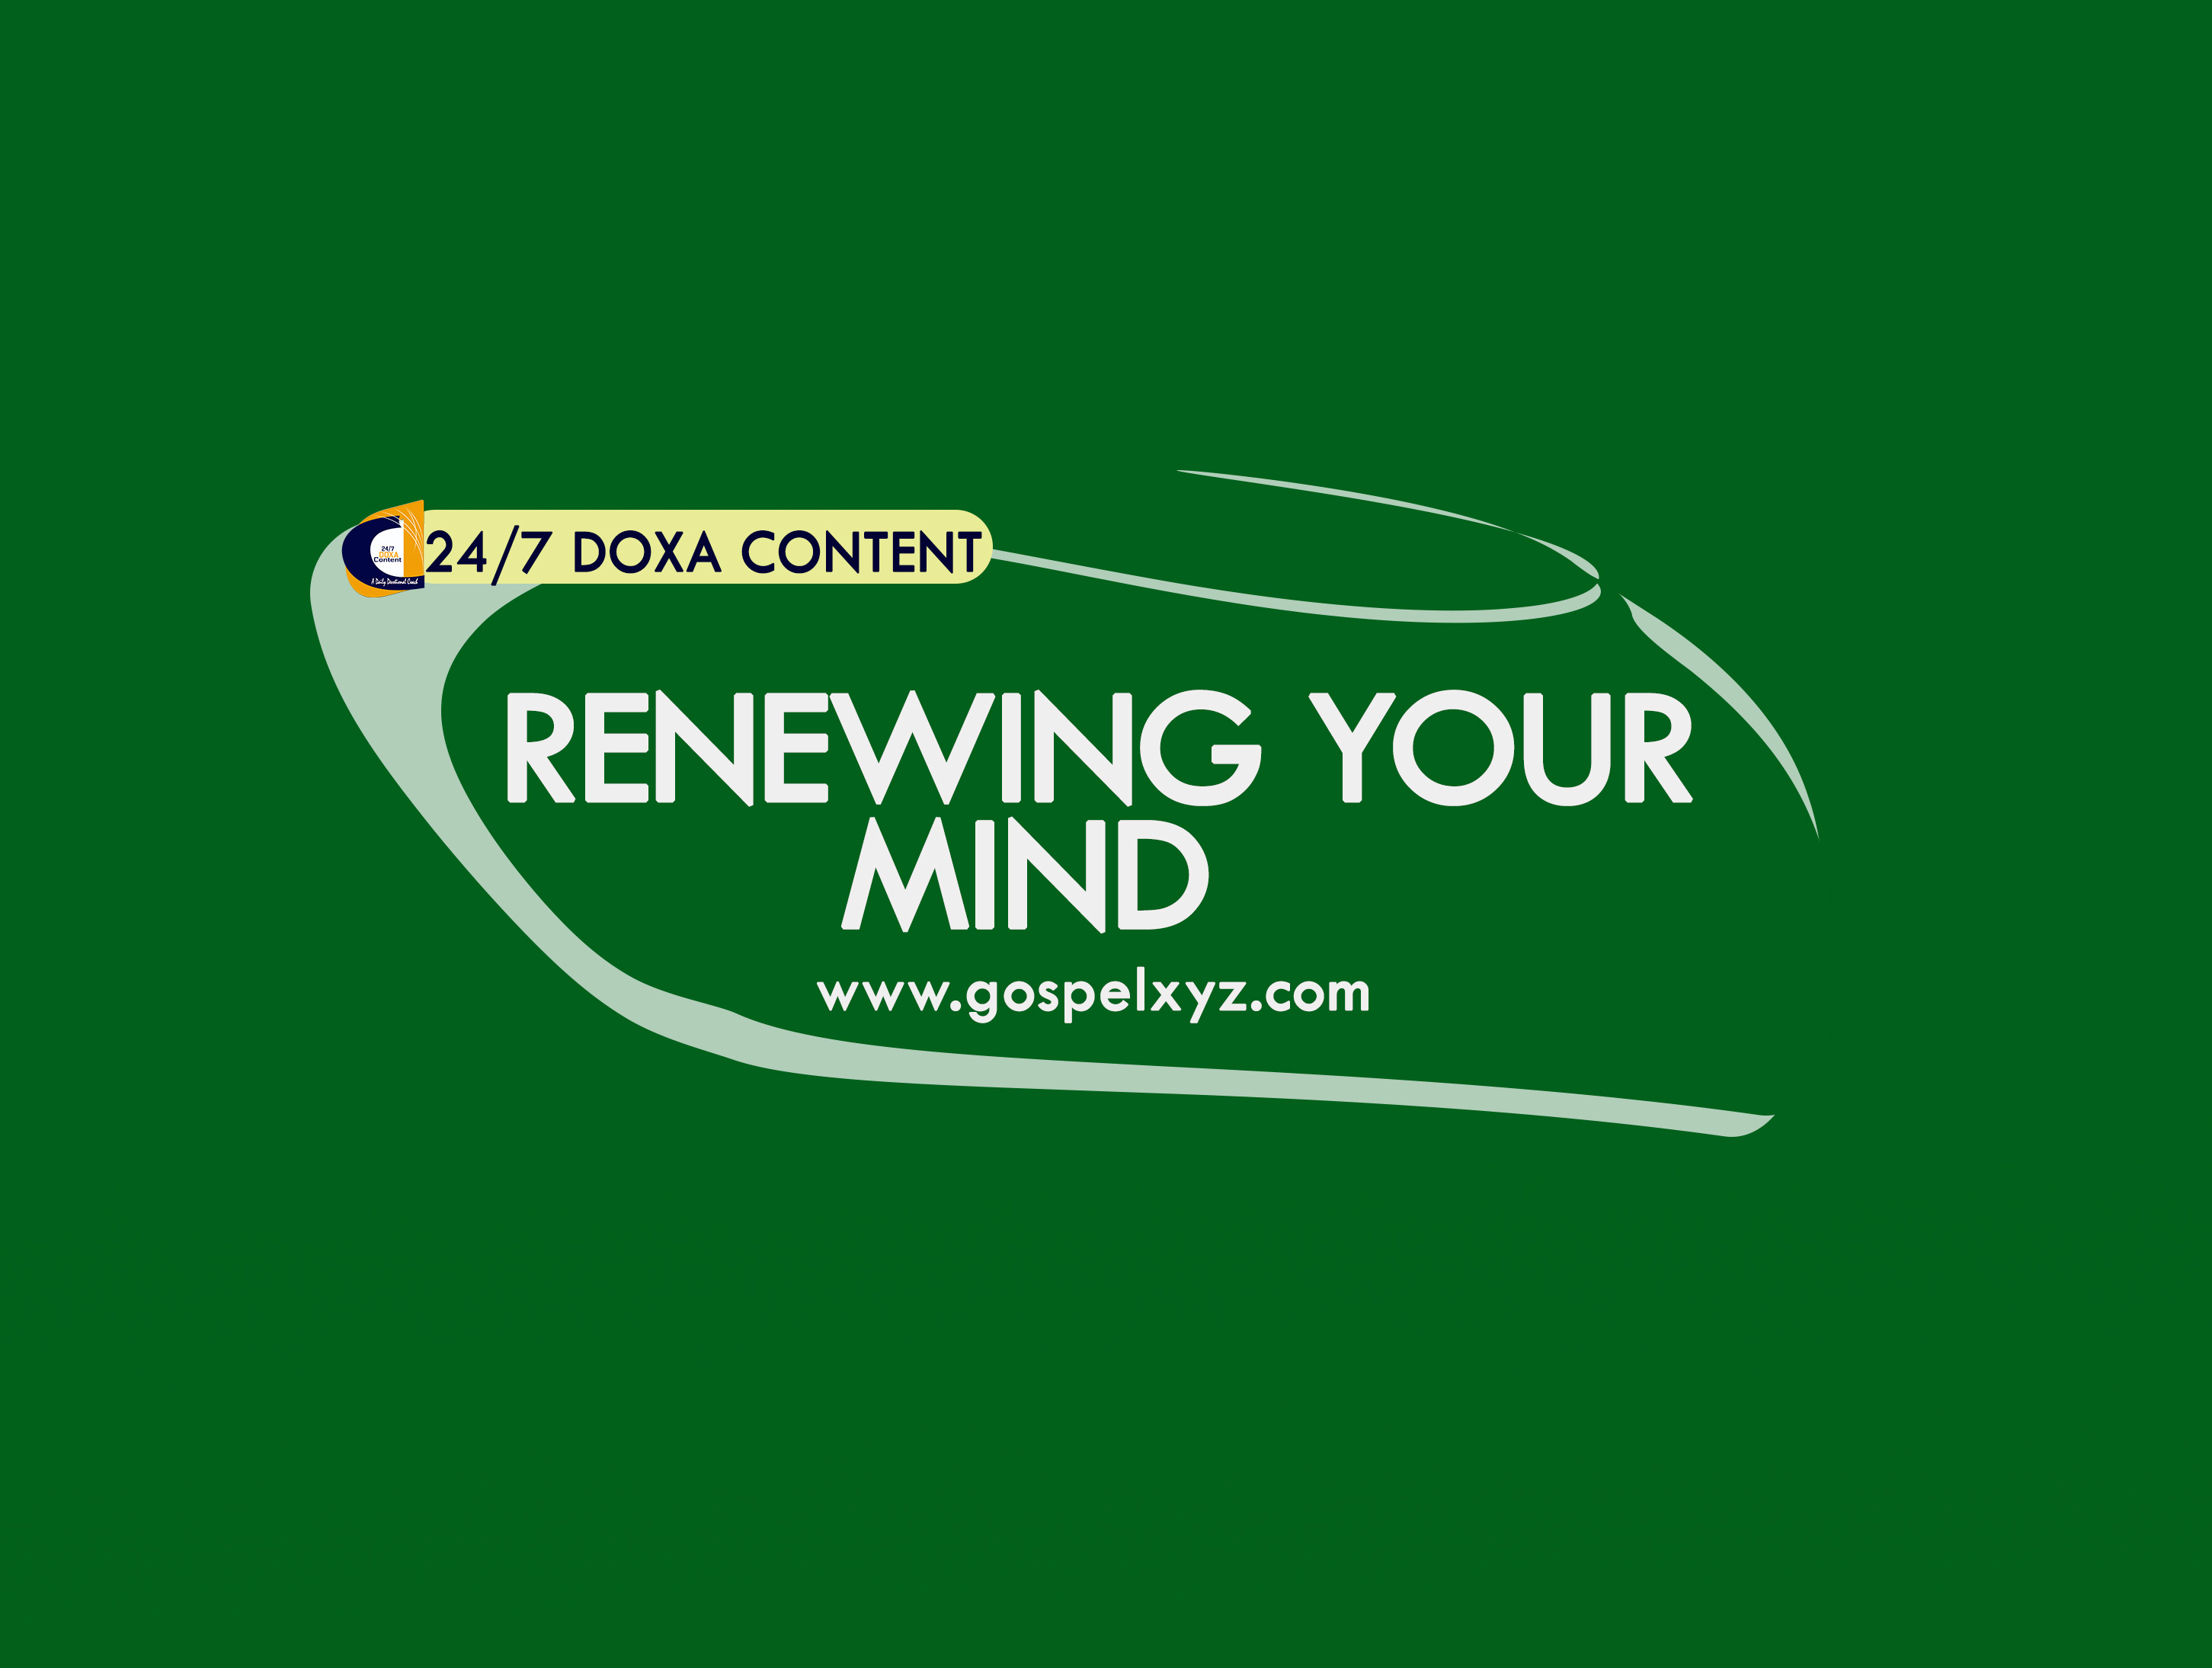 24/7 DOXA Content 2019 MONDAY, 8th July-RENEWING YOUR MIND